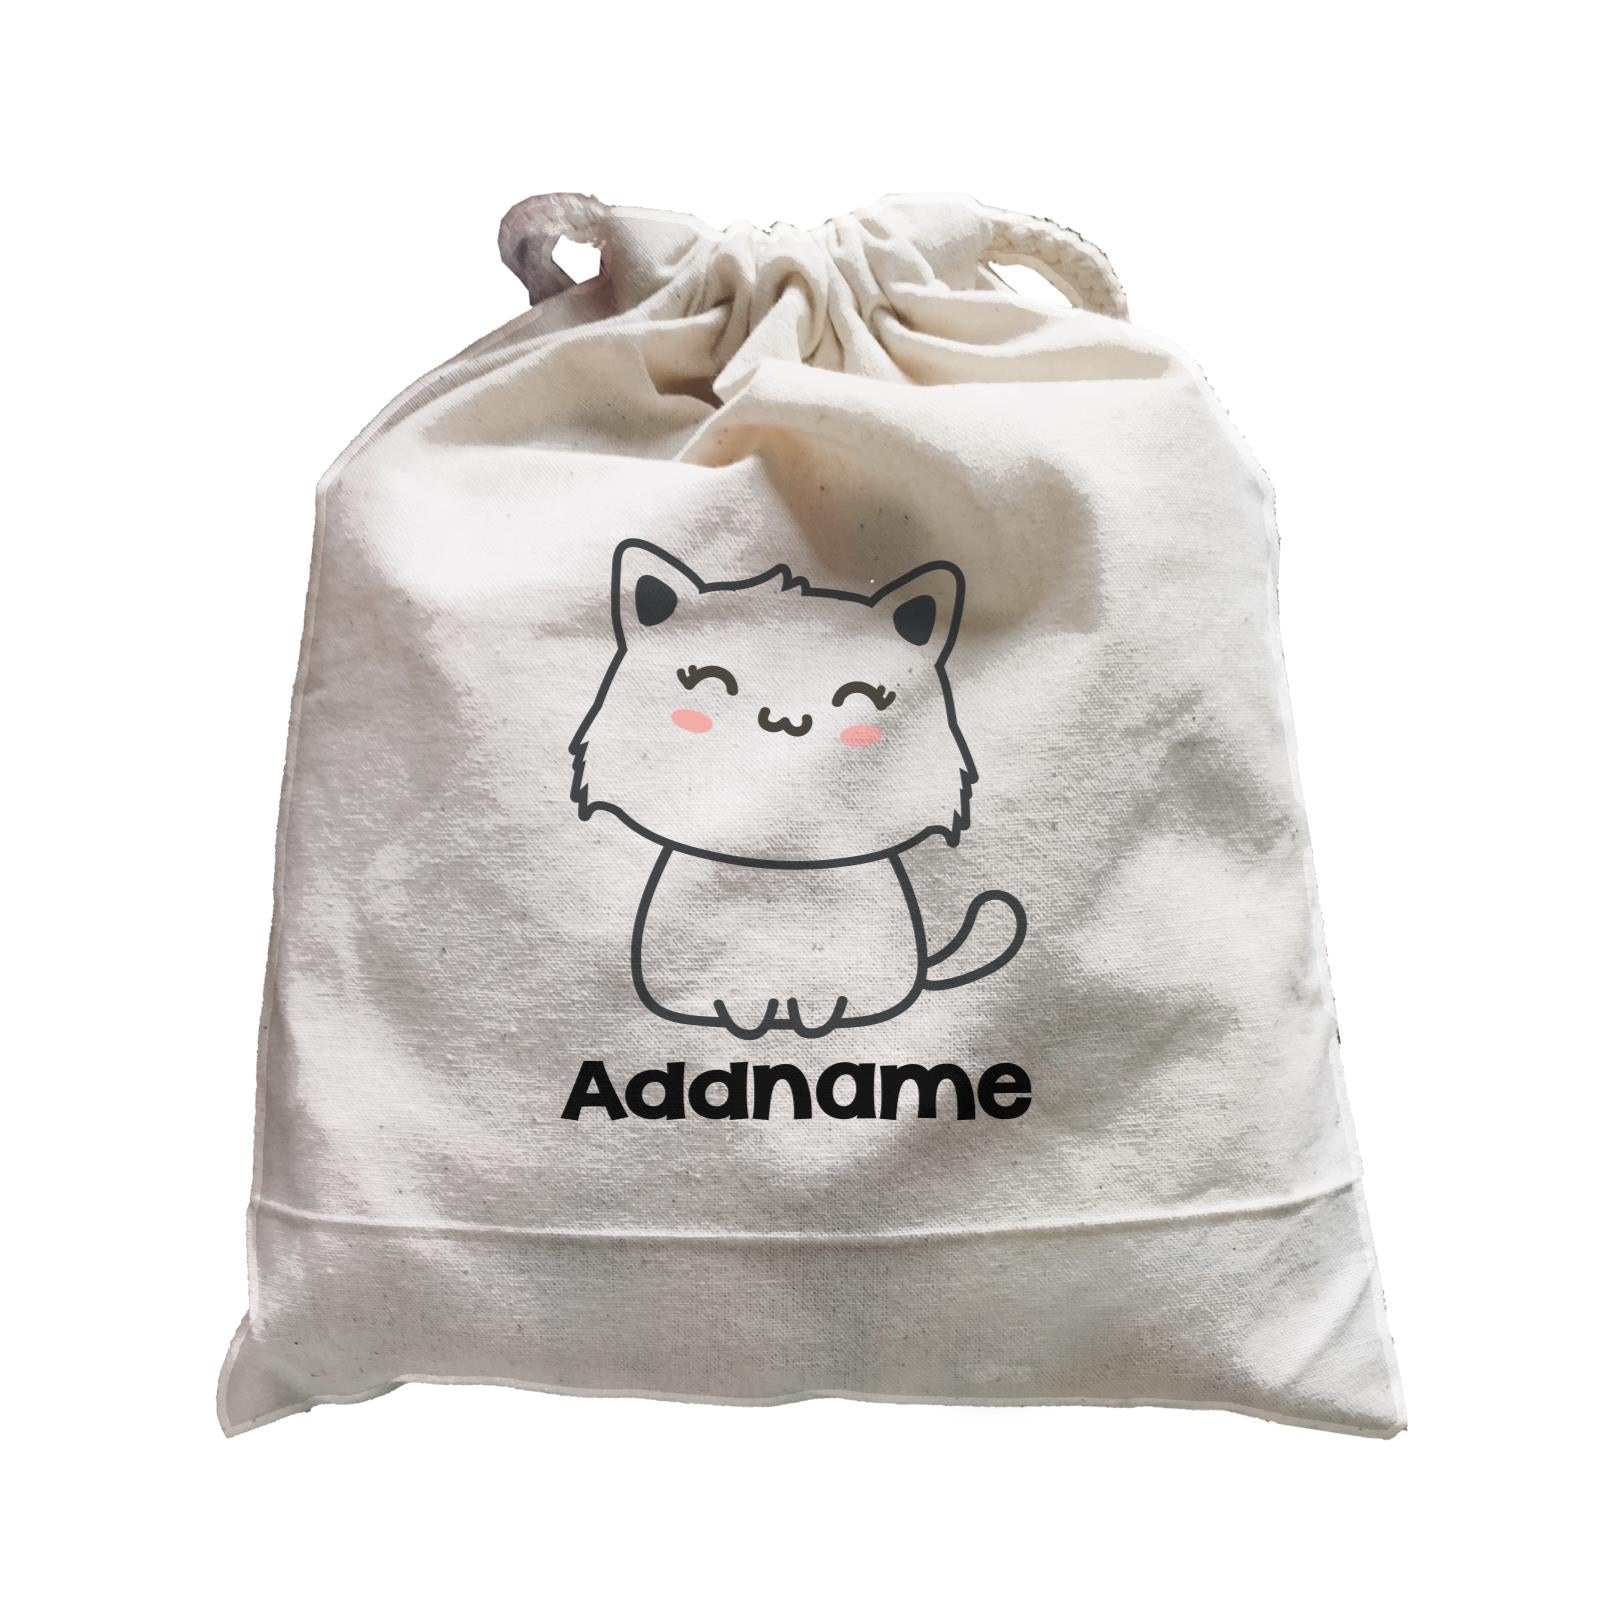 Drawn Adorable Cats White Addname Satchel